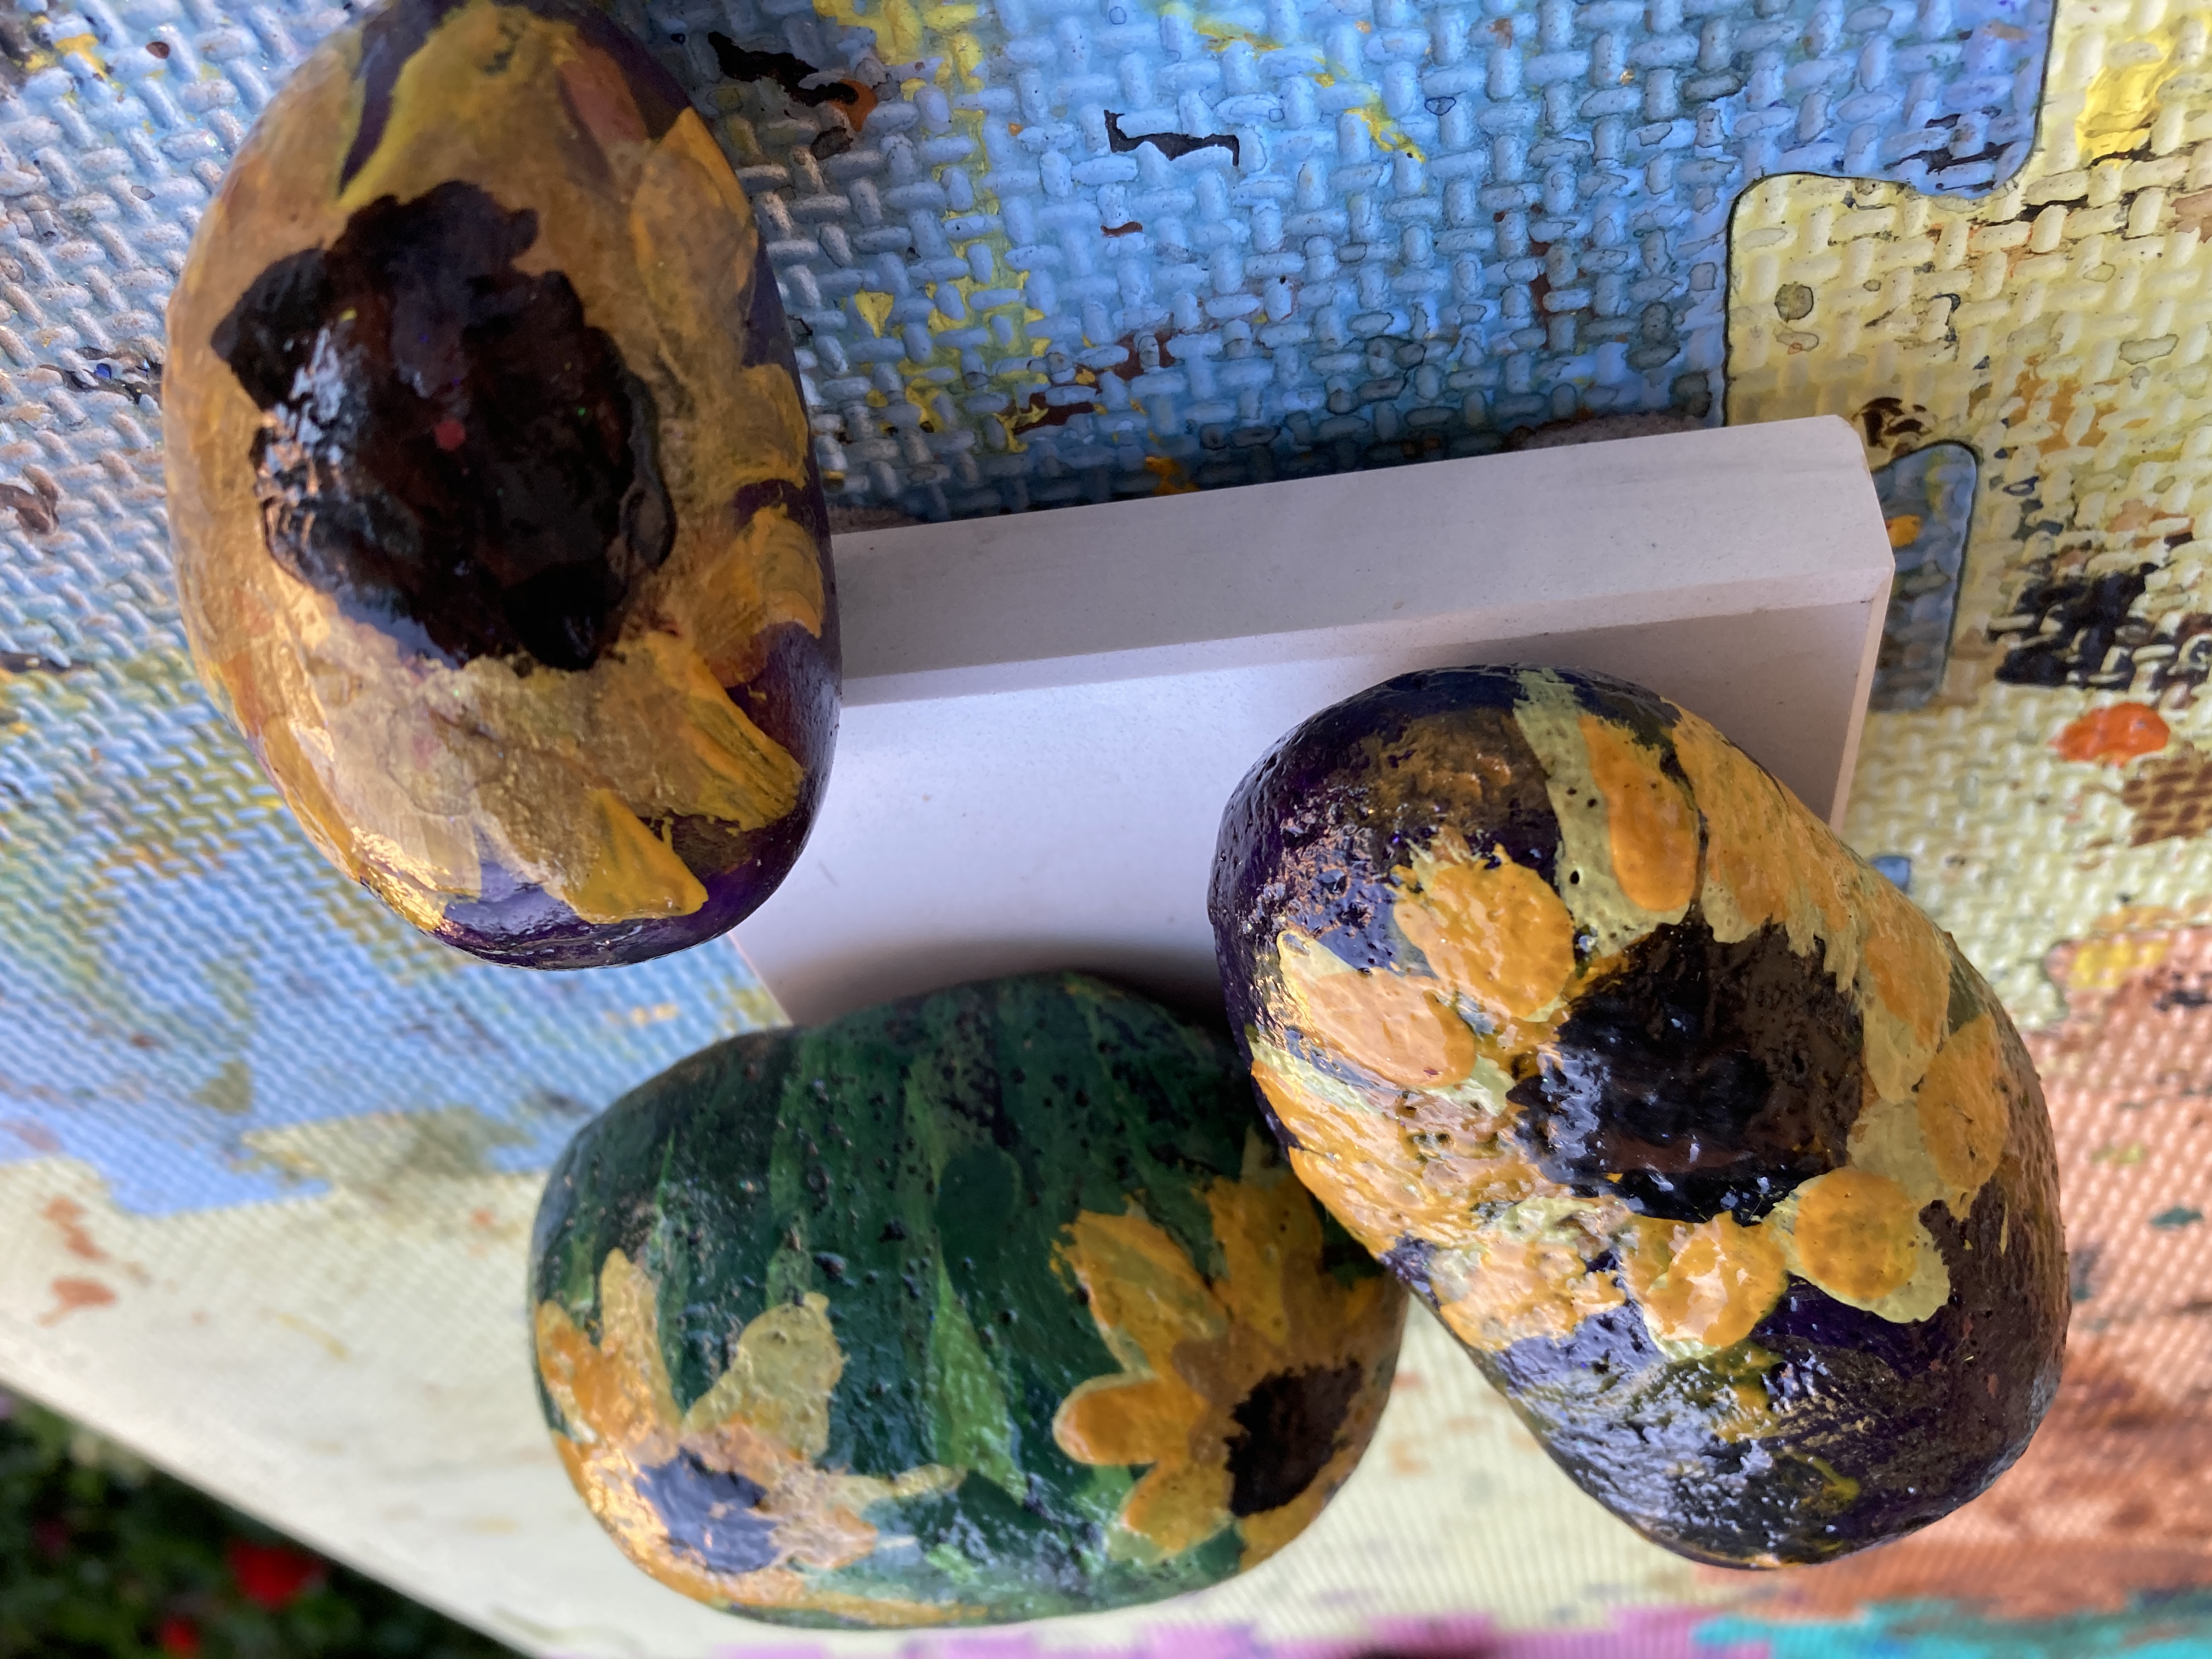 Several rocks in various sizes have solid green, blue or purple backgrounds and bright yellow sunflowers painted on them.